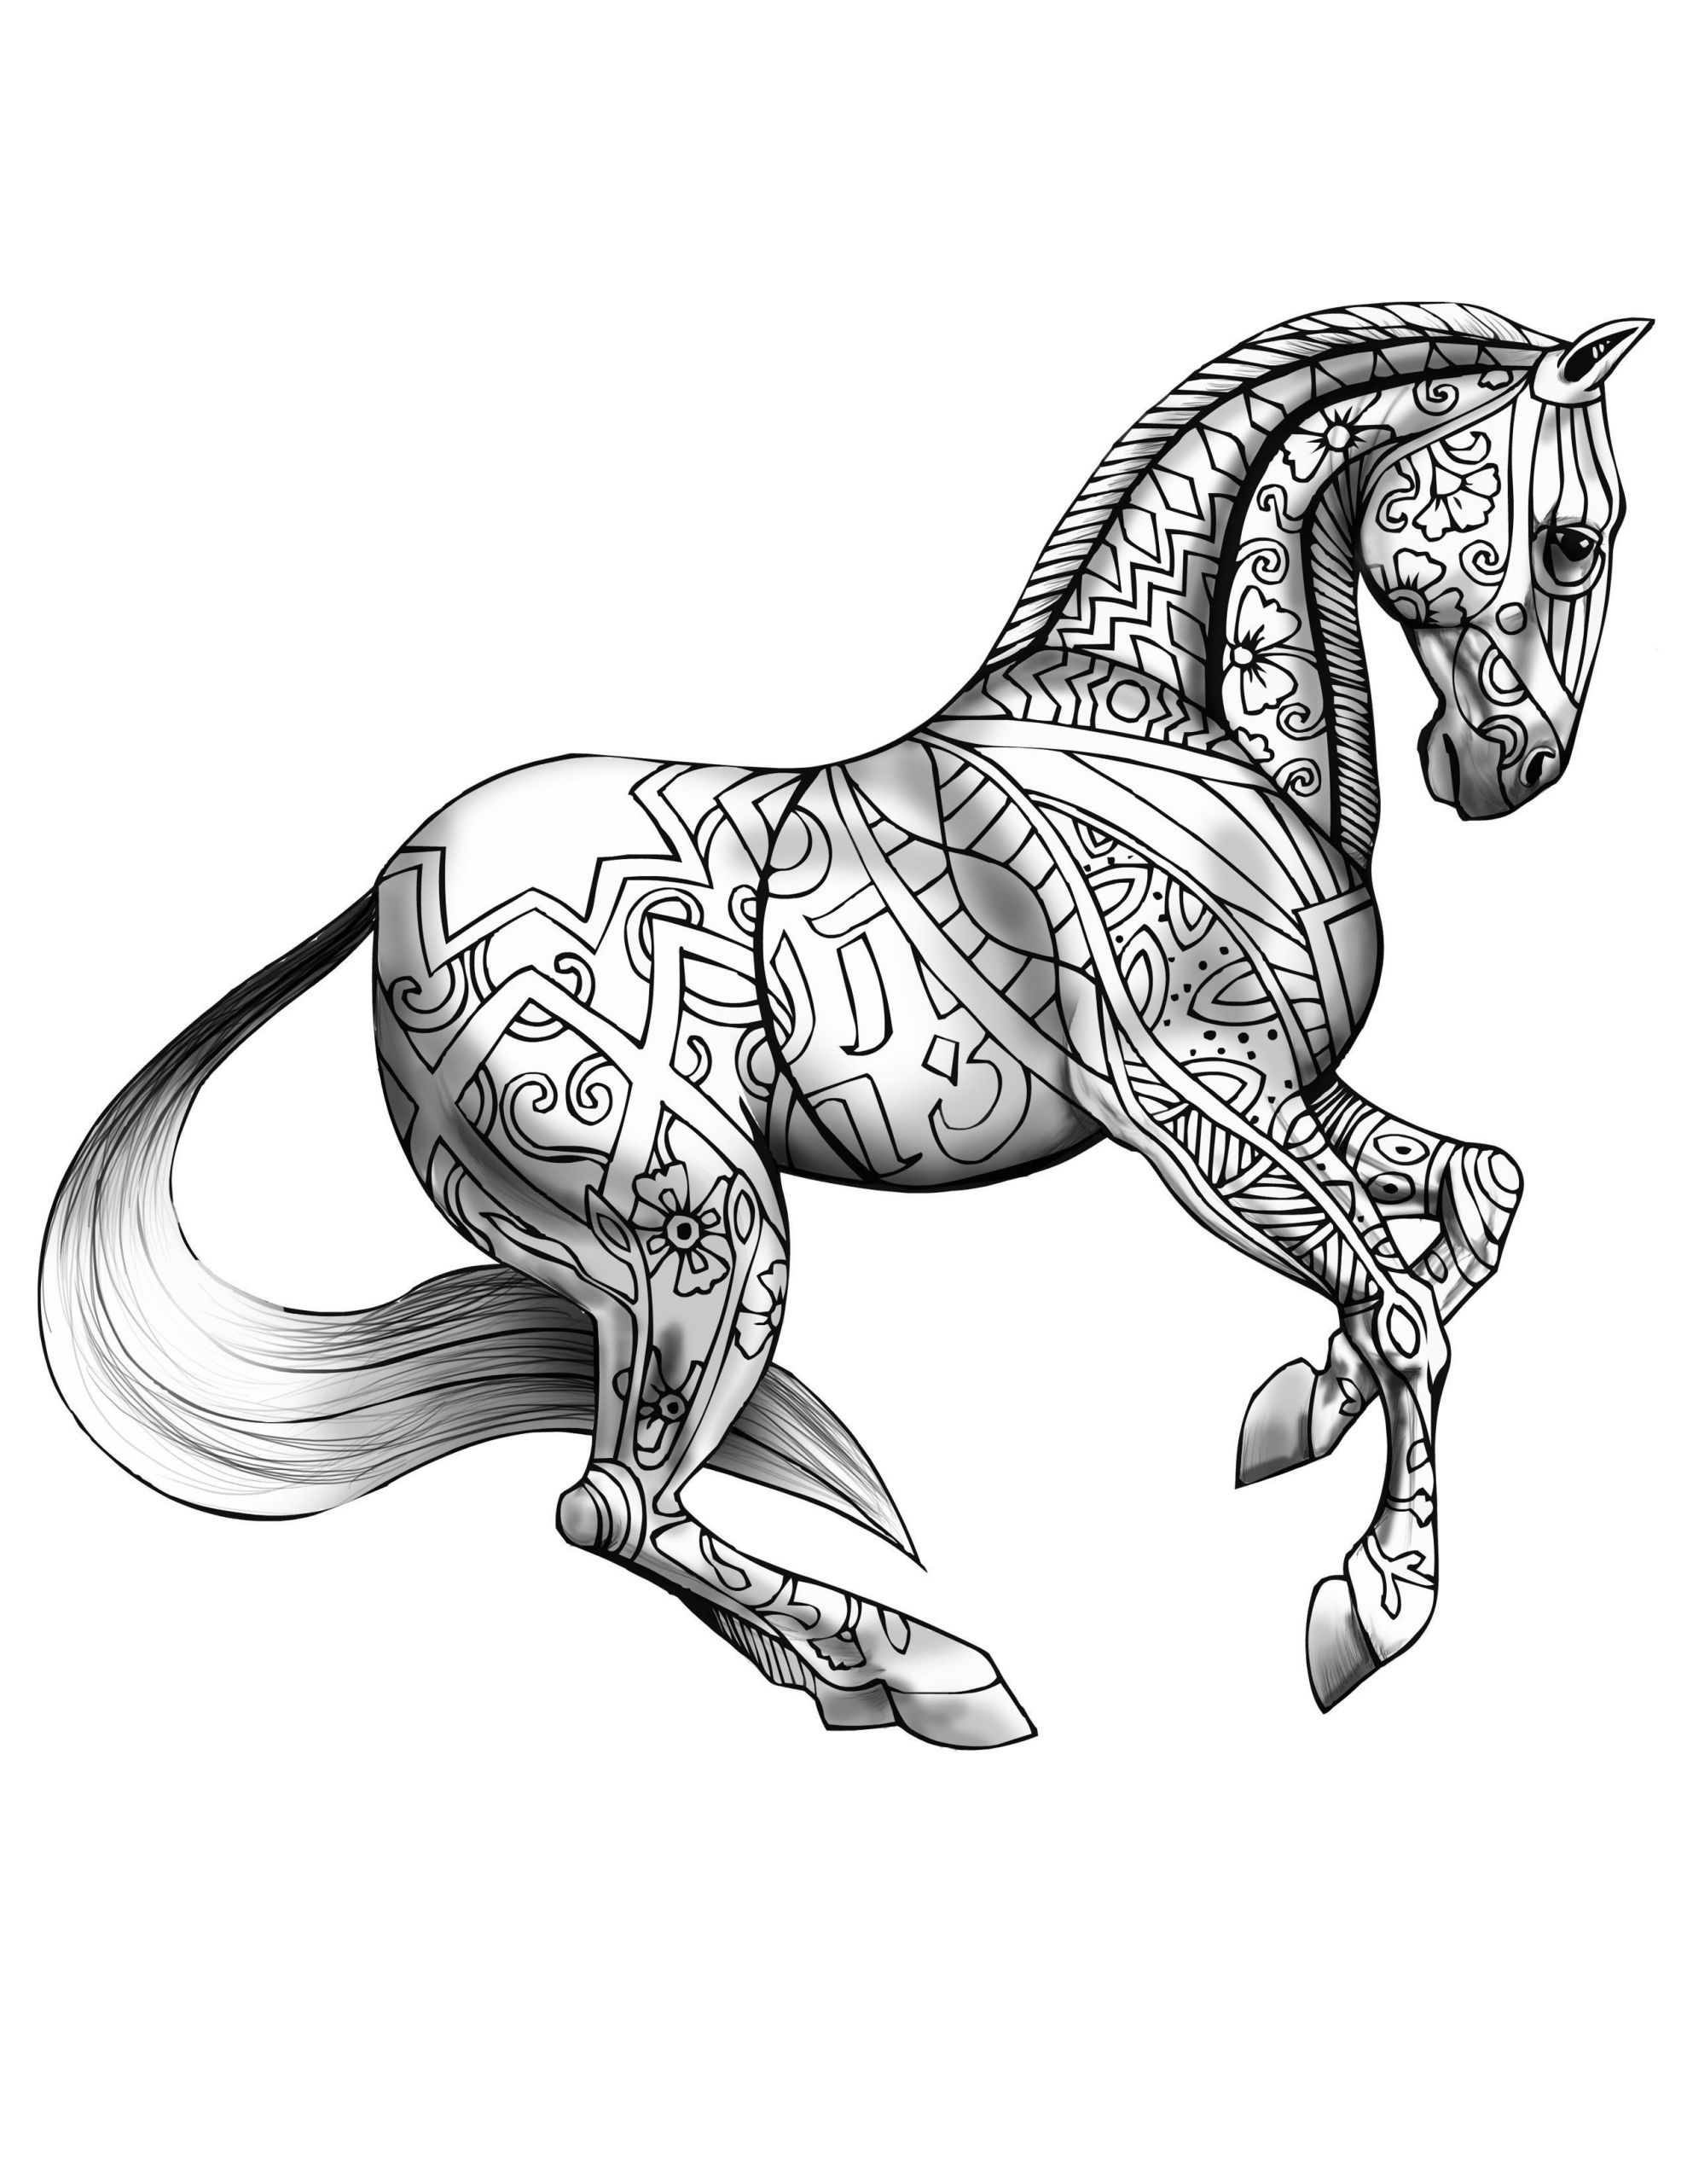 Adult Coloring Pages Horses
 Horse Coloring Pages for Adults Best Coloring Pages For Kids